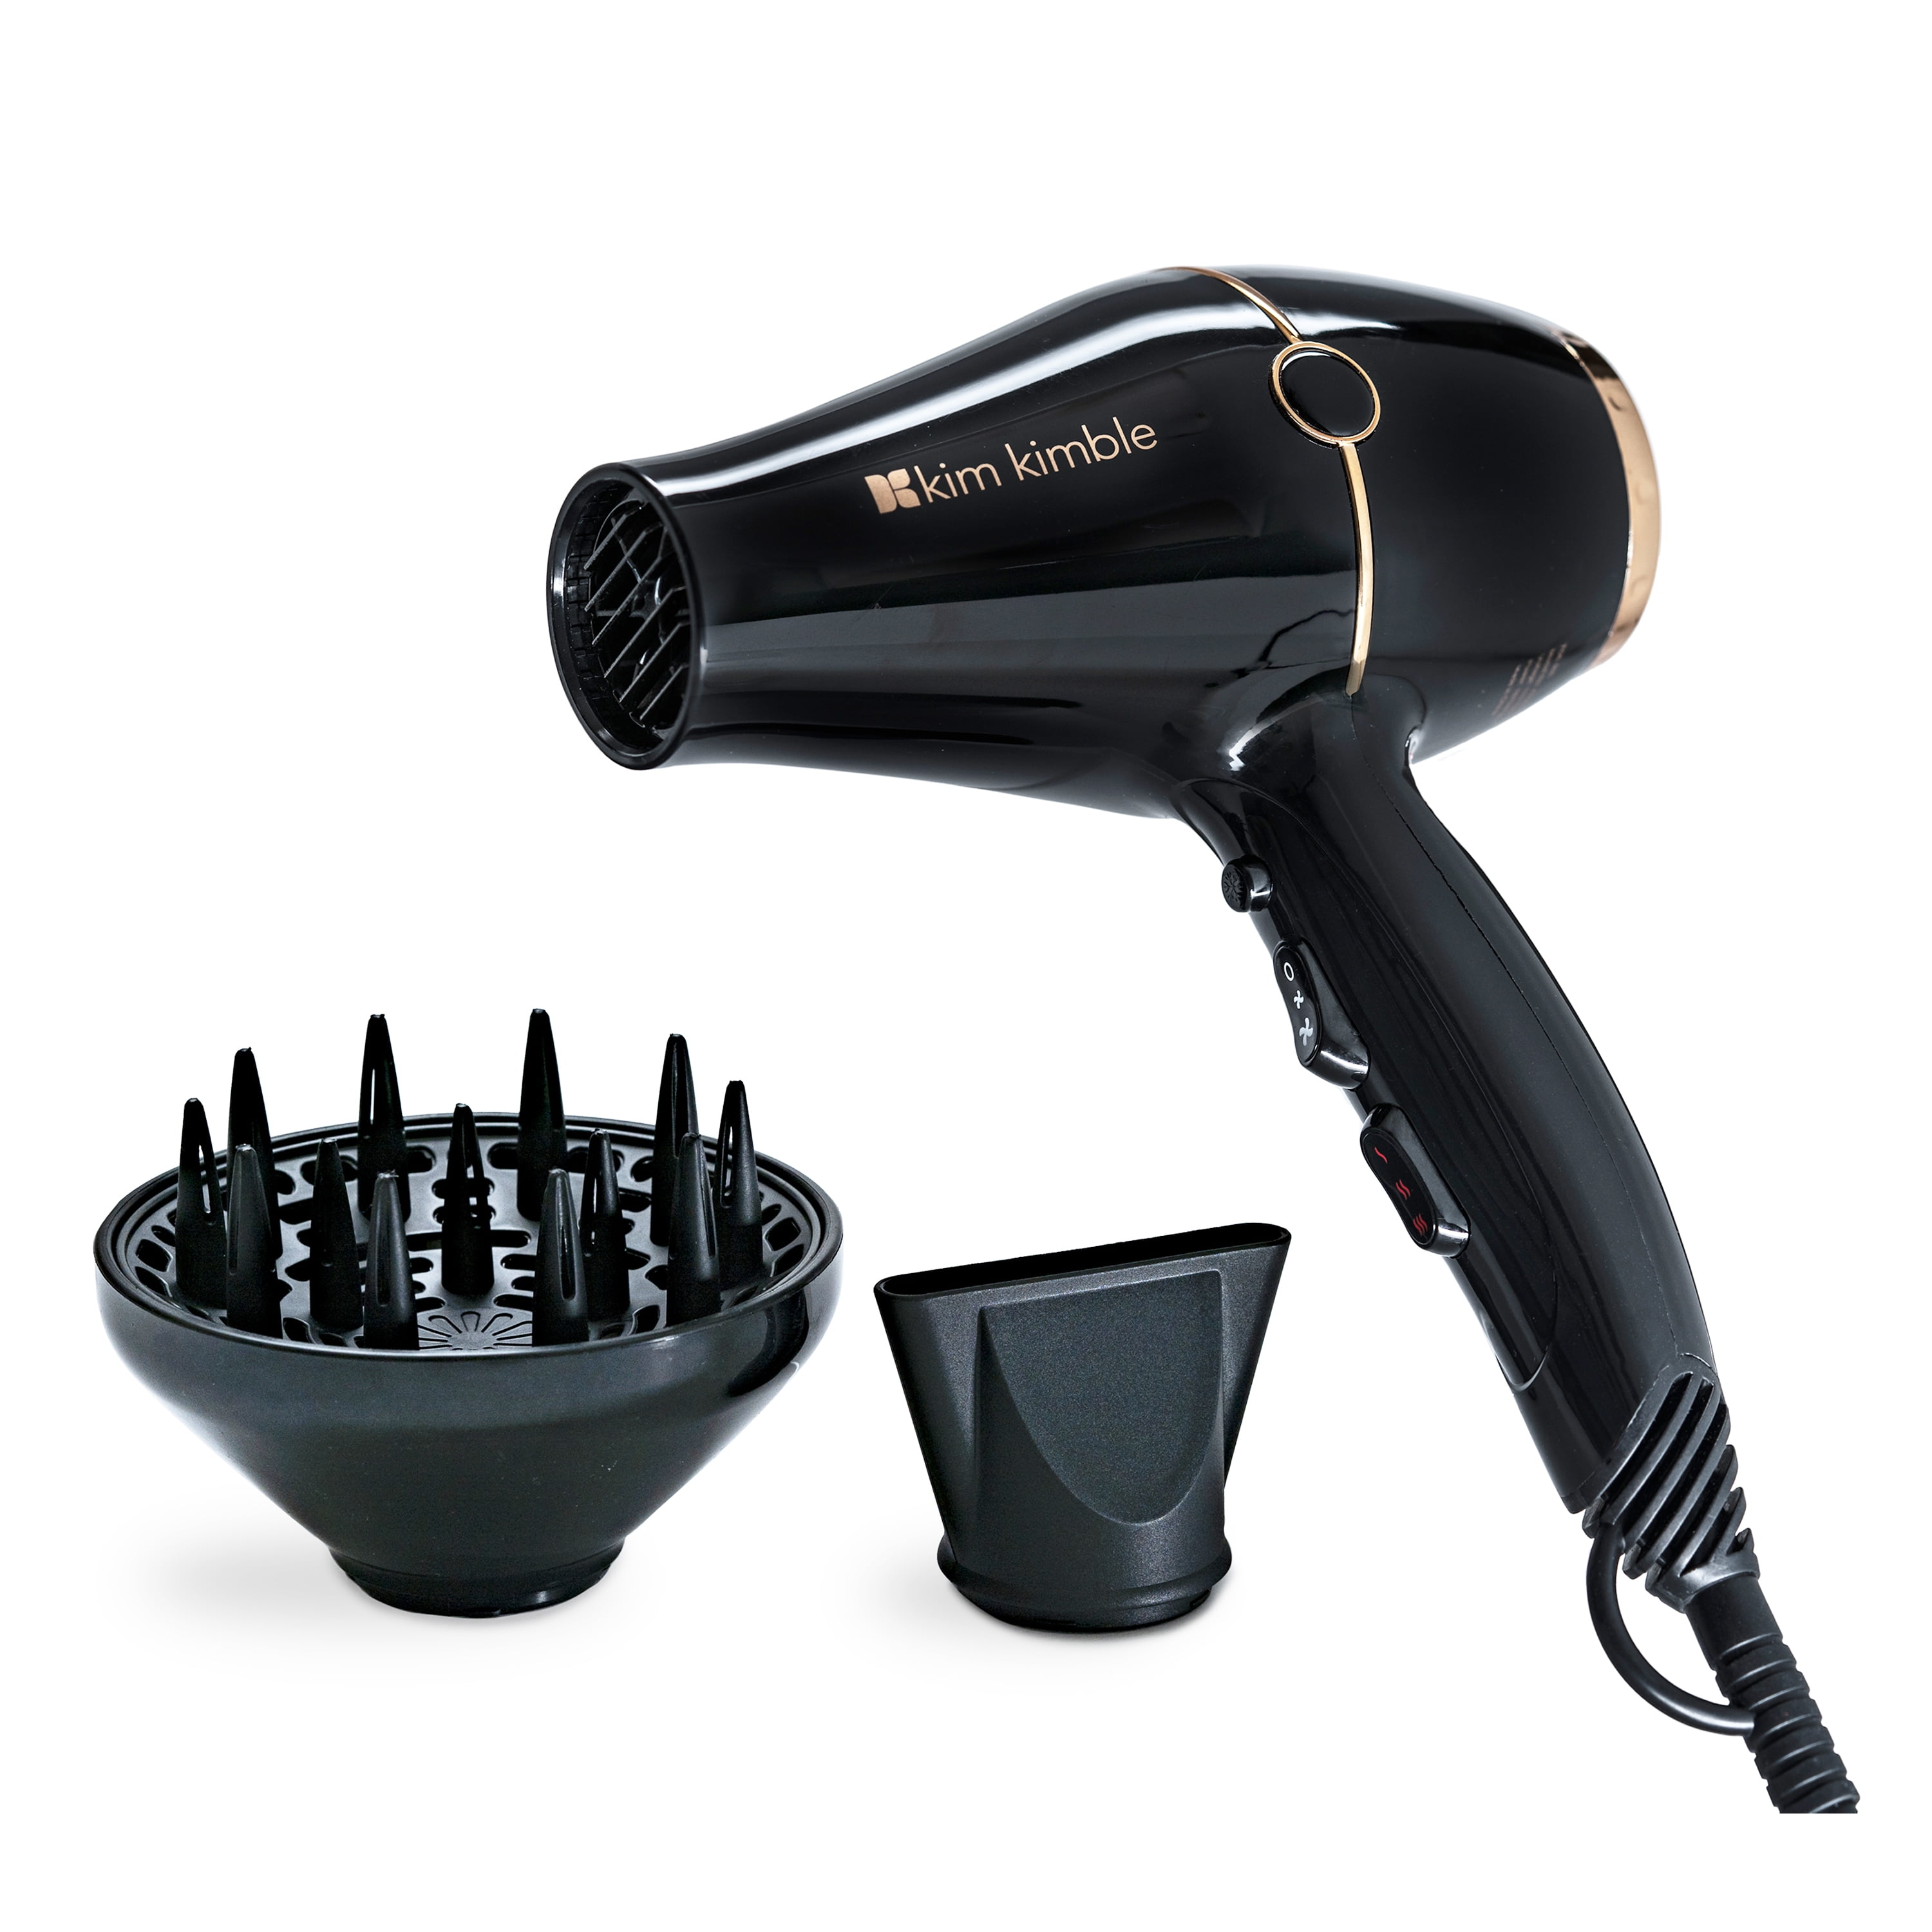 Kim Kimble Celebrity Series Ultra-Light 1875W Pro Hair Dryer, Black & Rose Gold with Concentrator and Diffuser